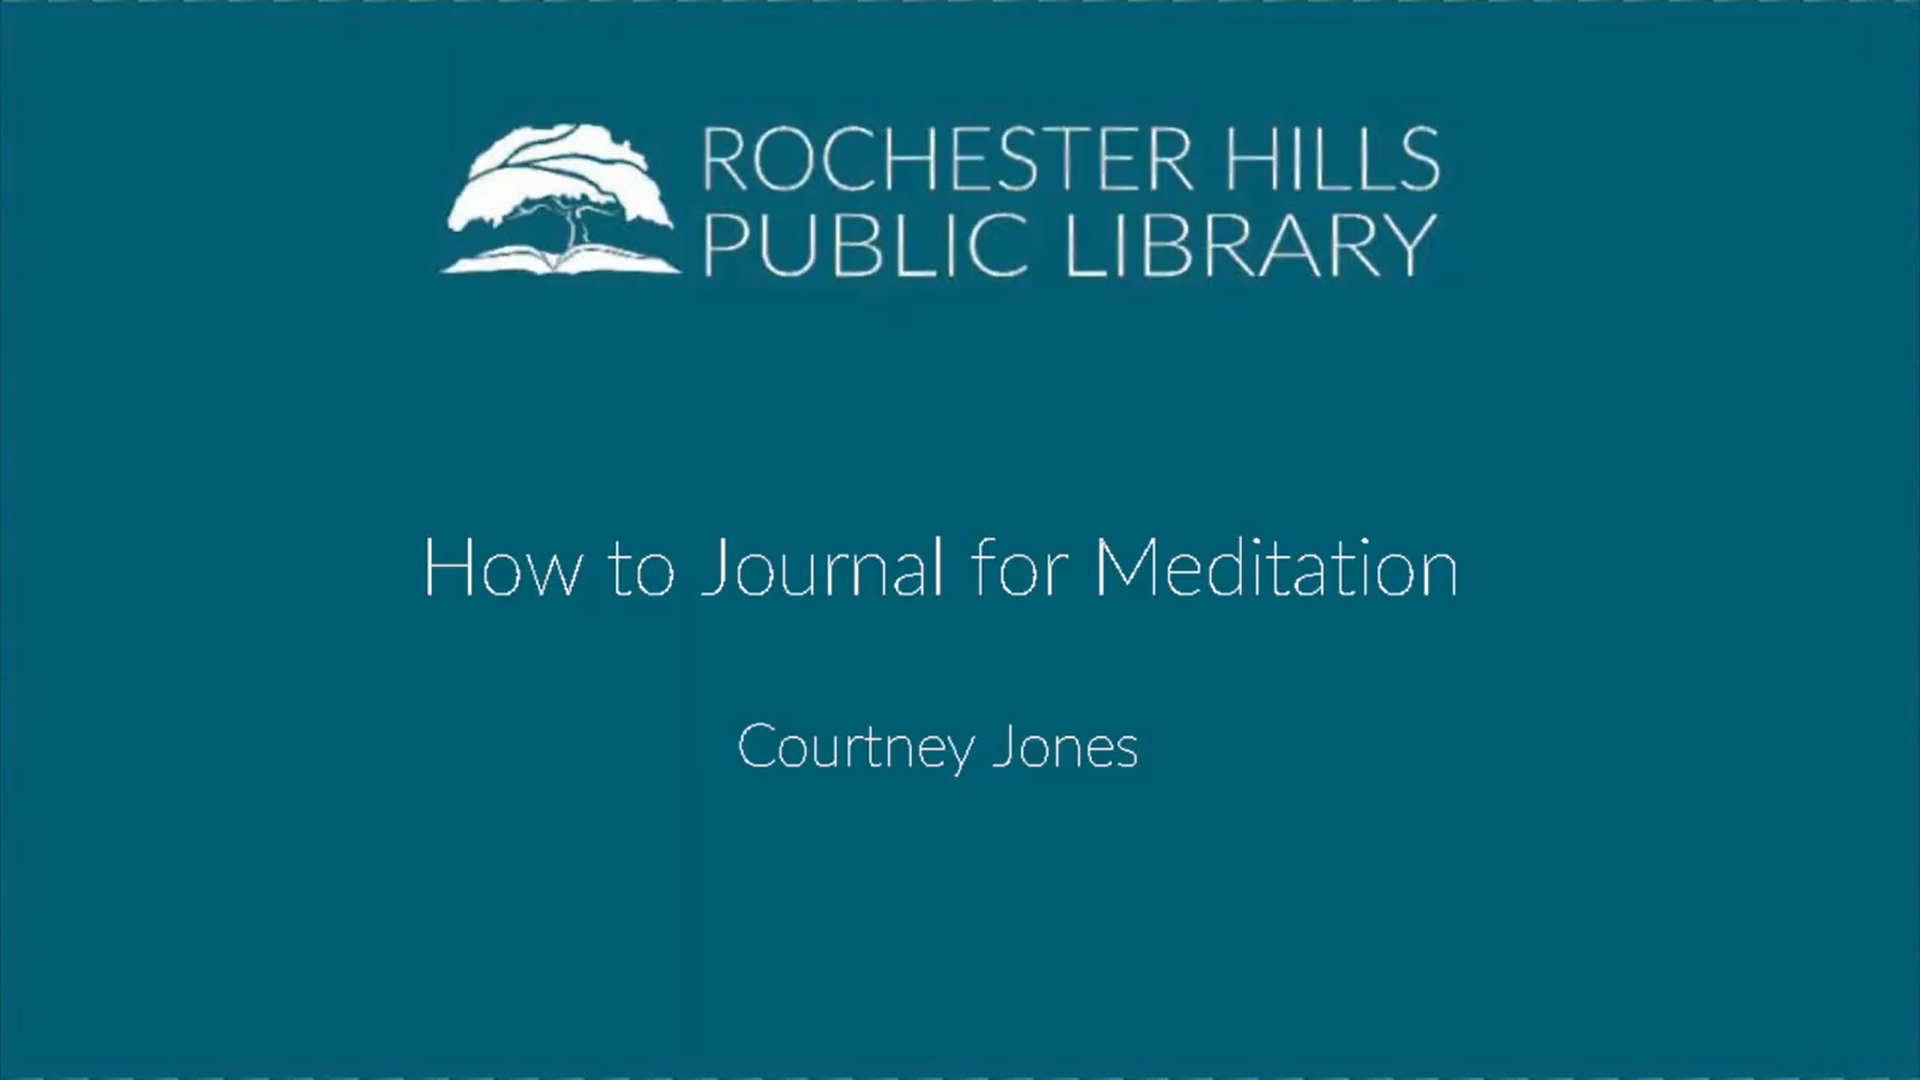 How to Journal for Meditation